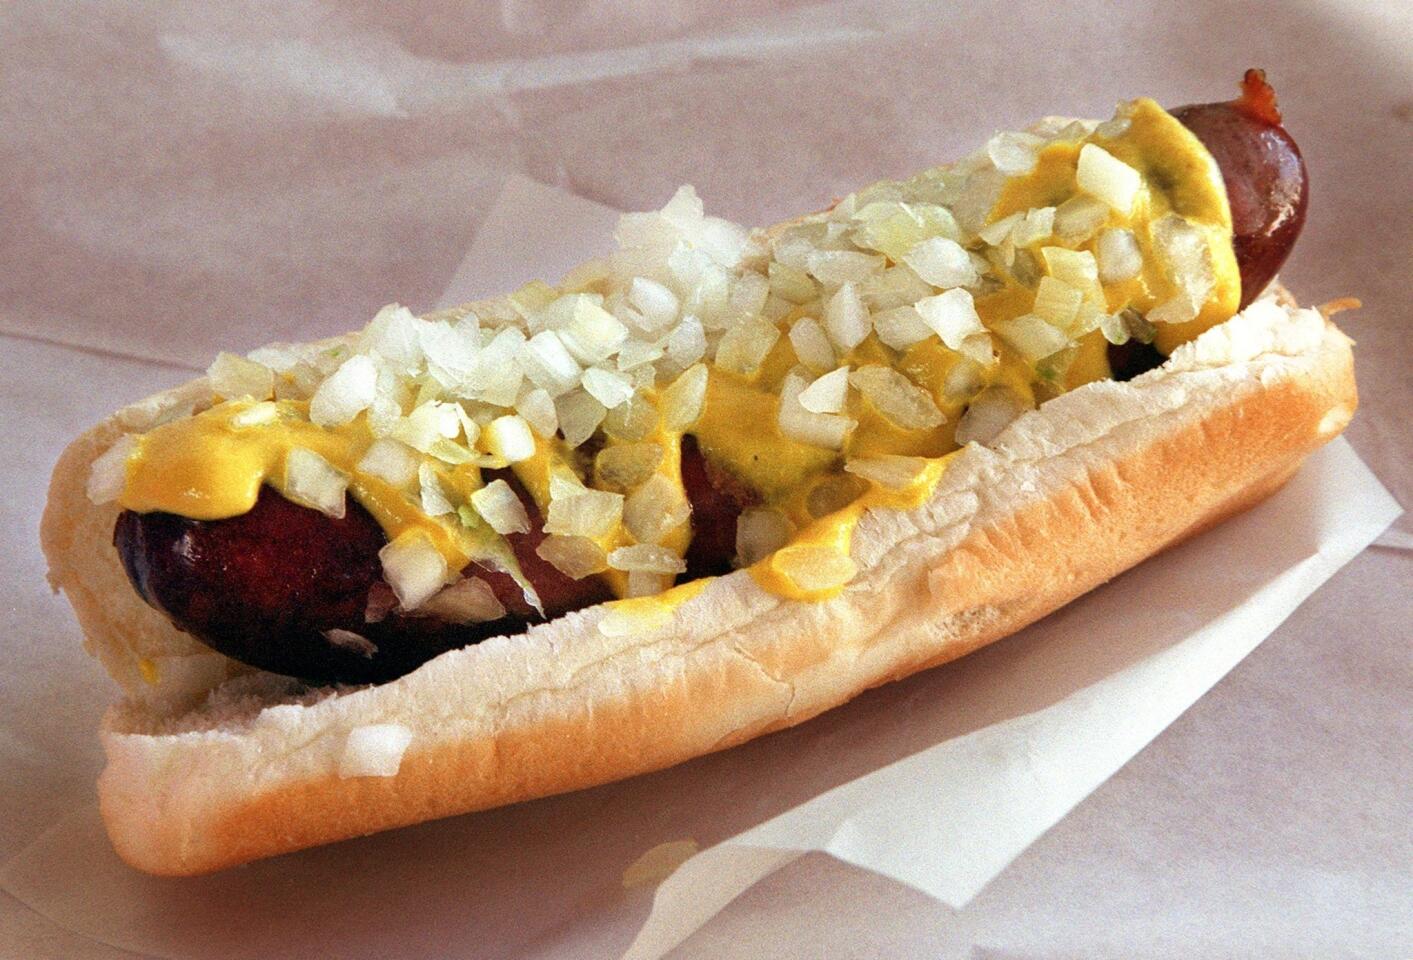 A Pink's hot dog.